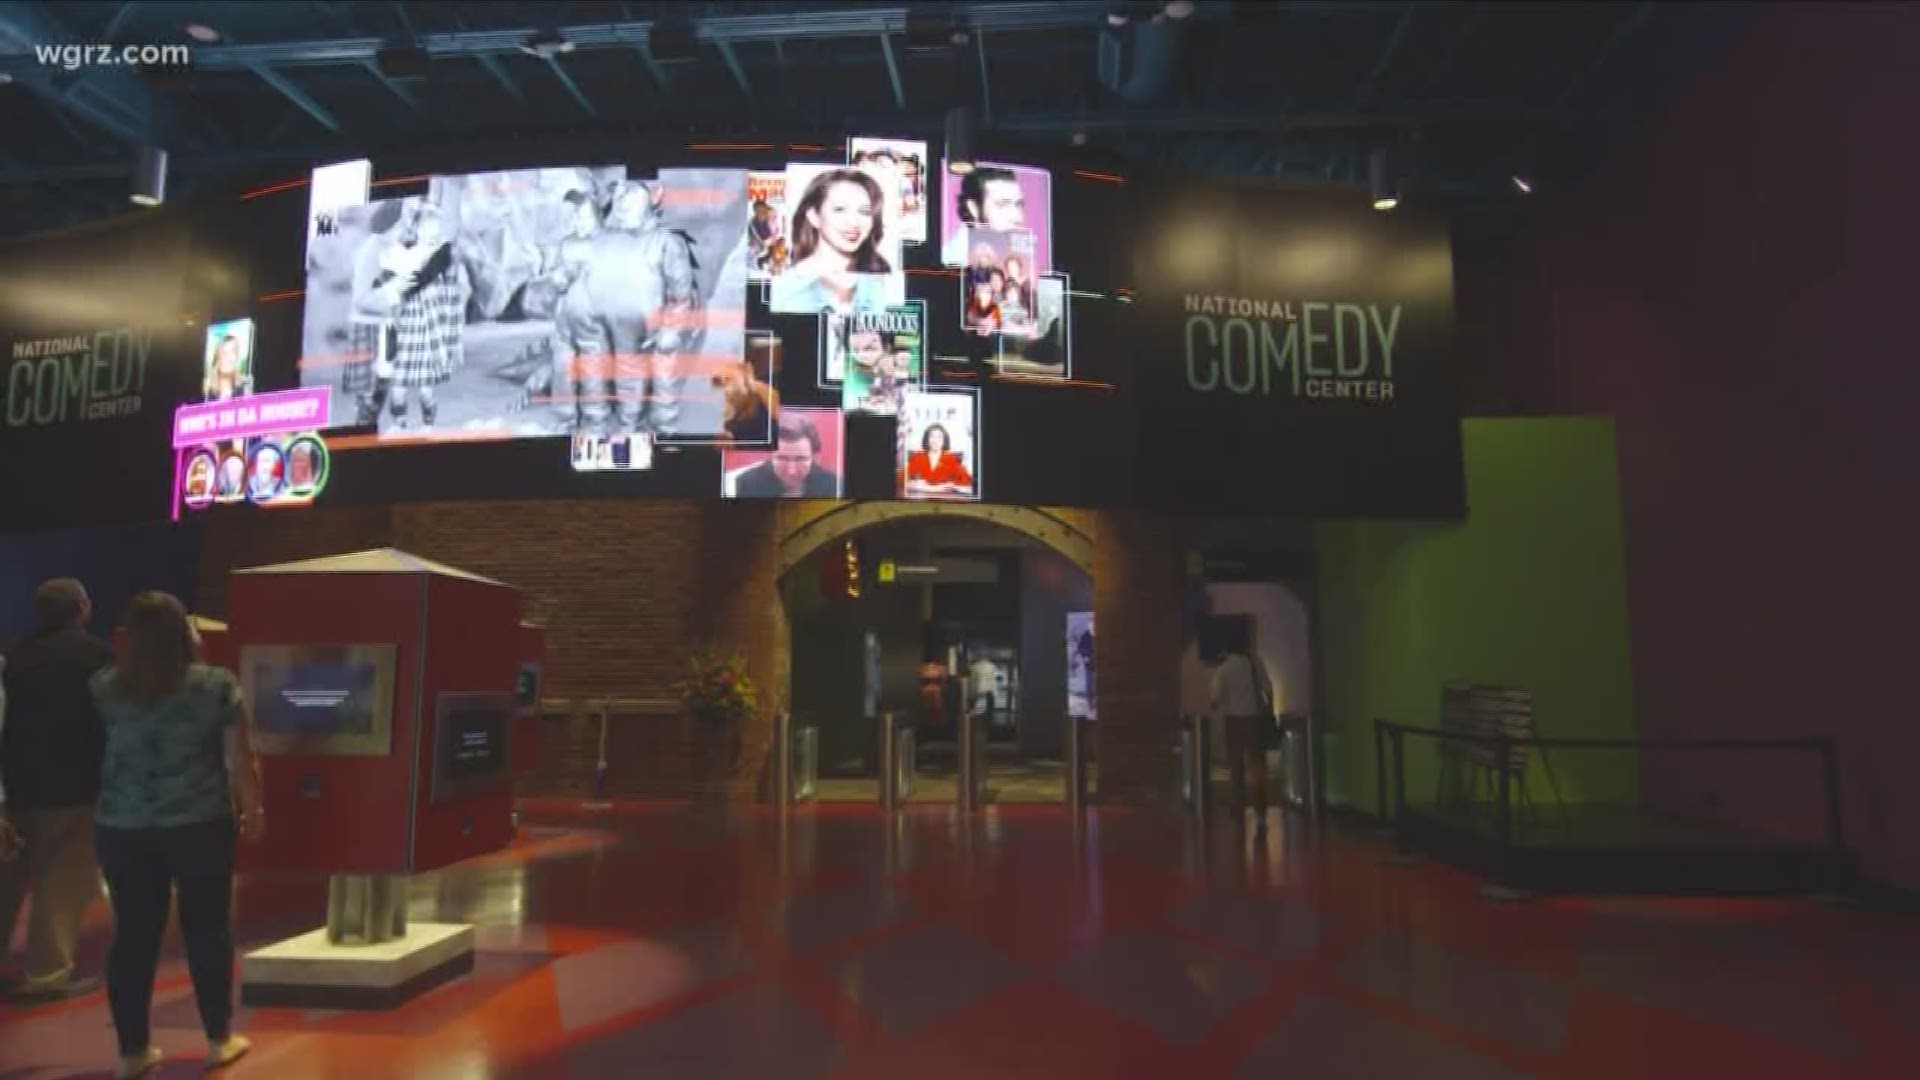 National Comedy Center Best New Attraction